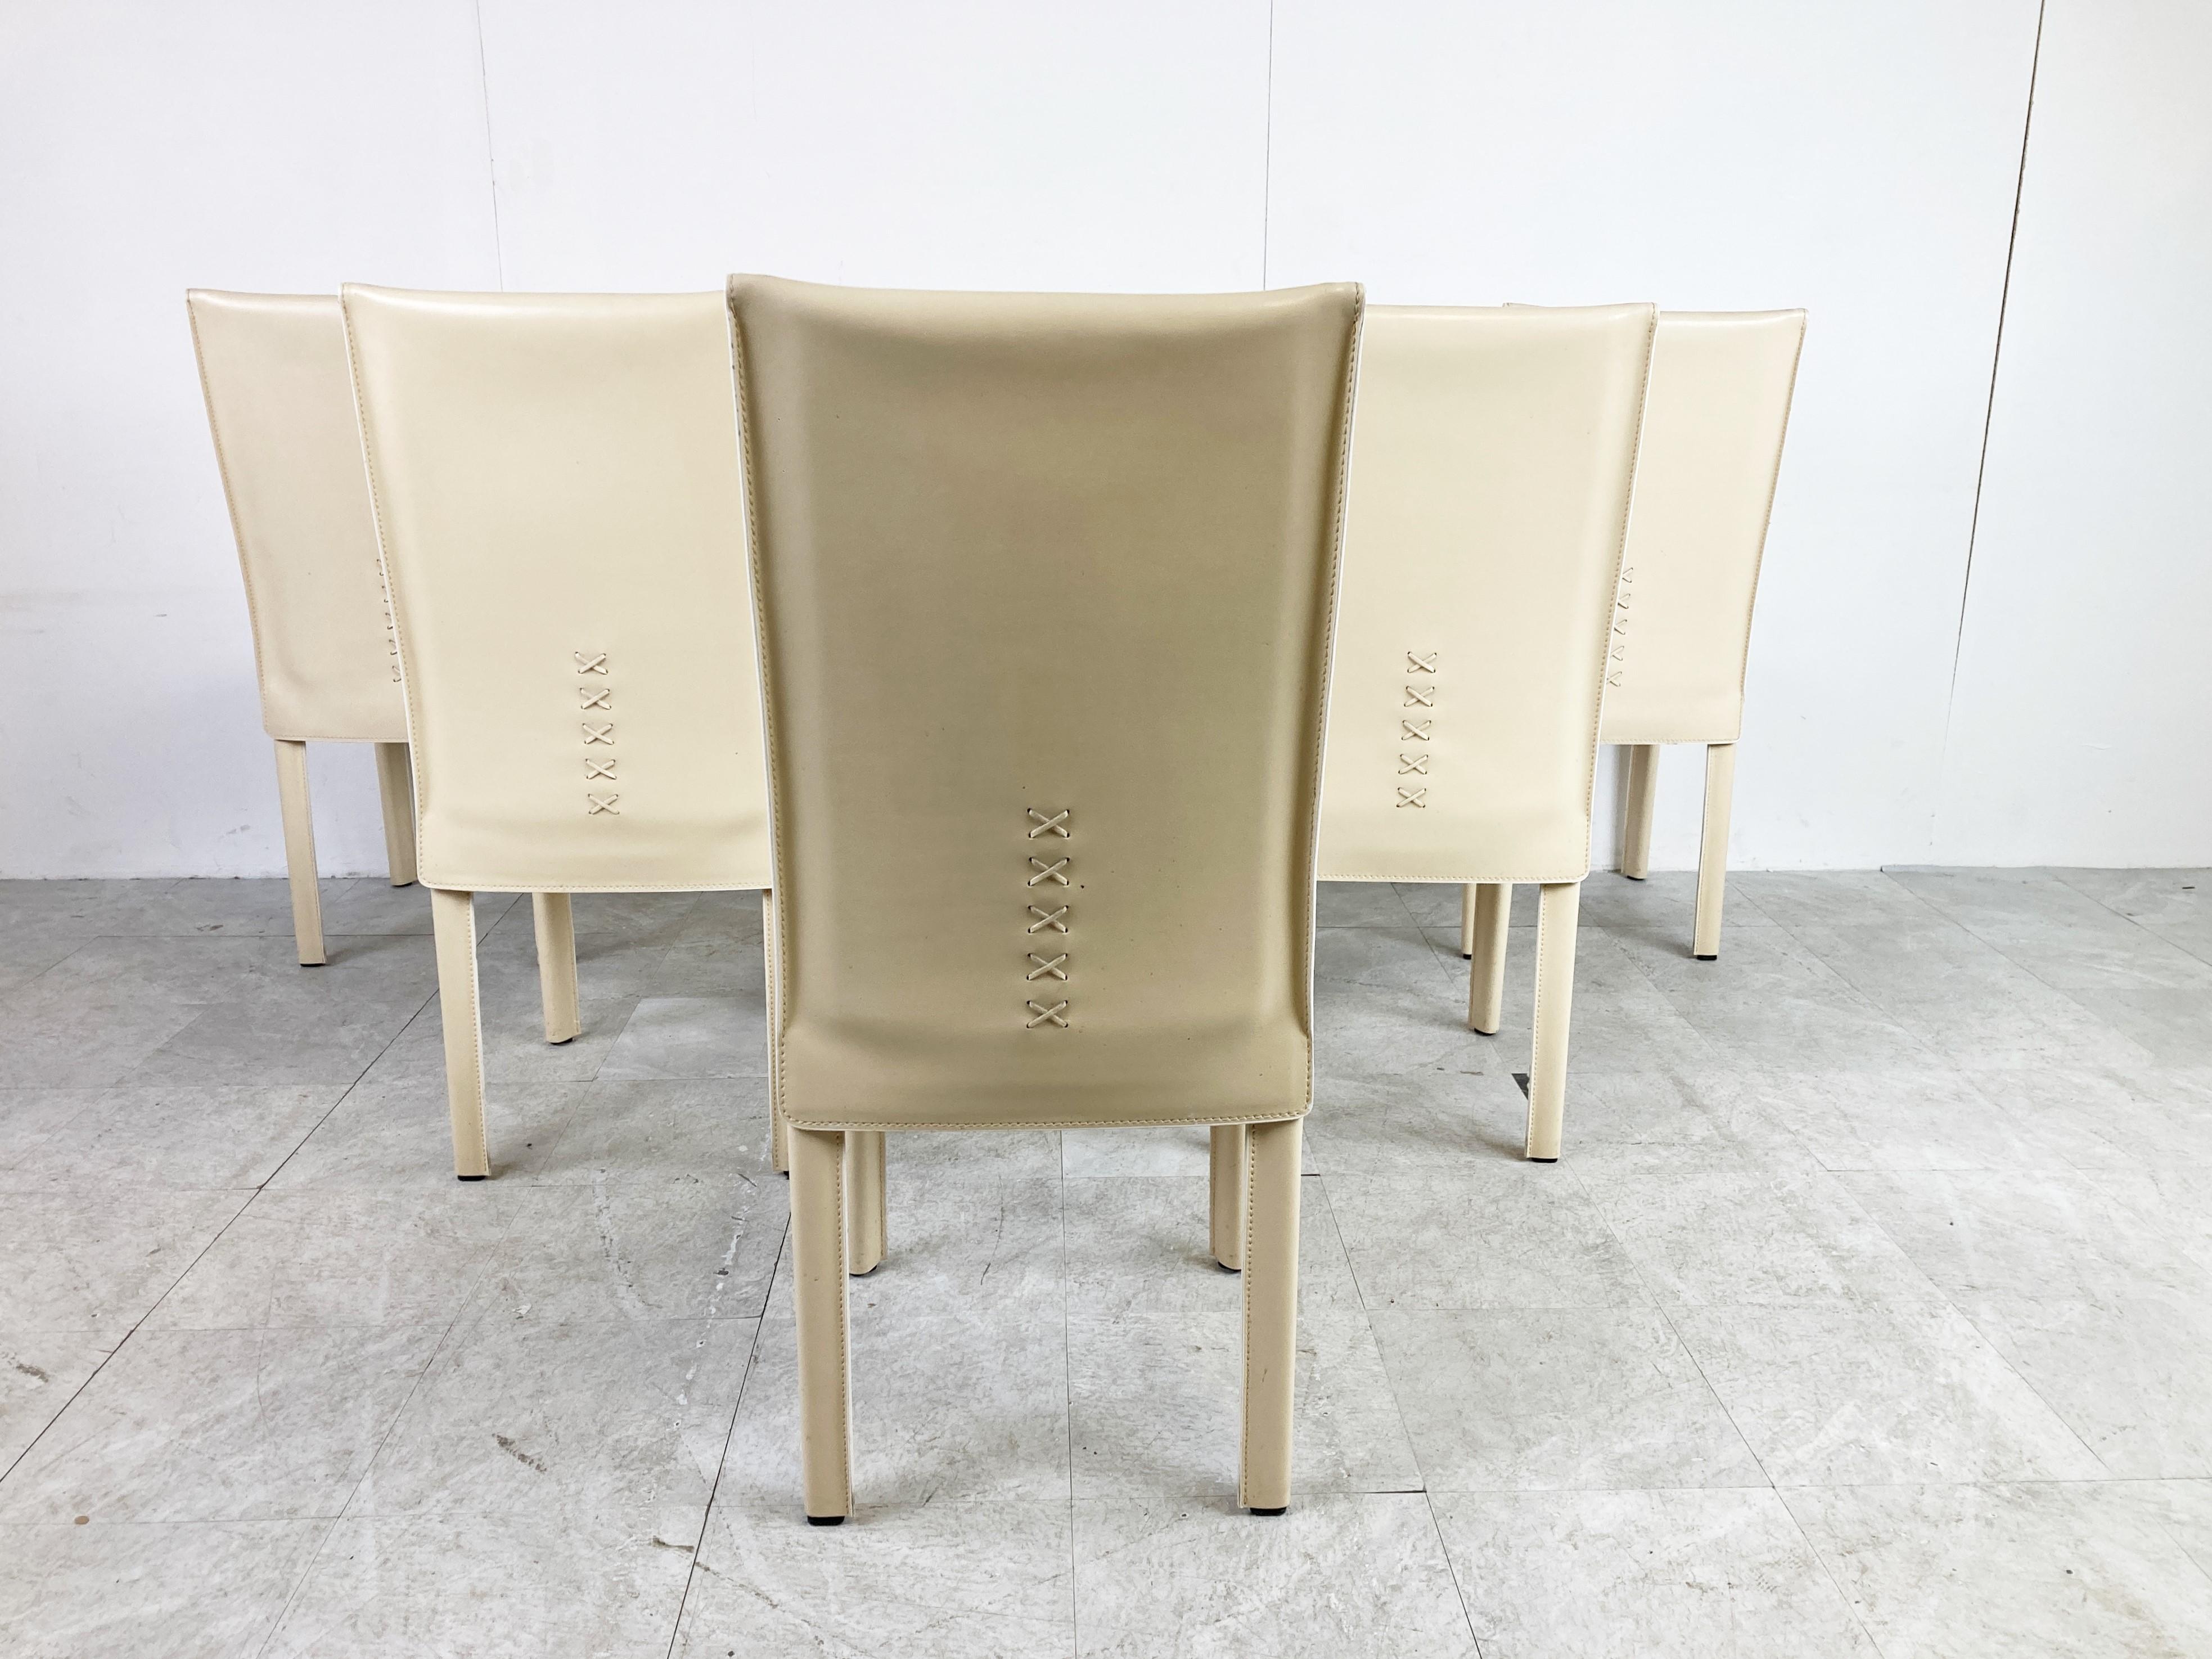 Vintage Dining Chairs by Arper Italy, 1980s For Sale 1